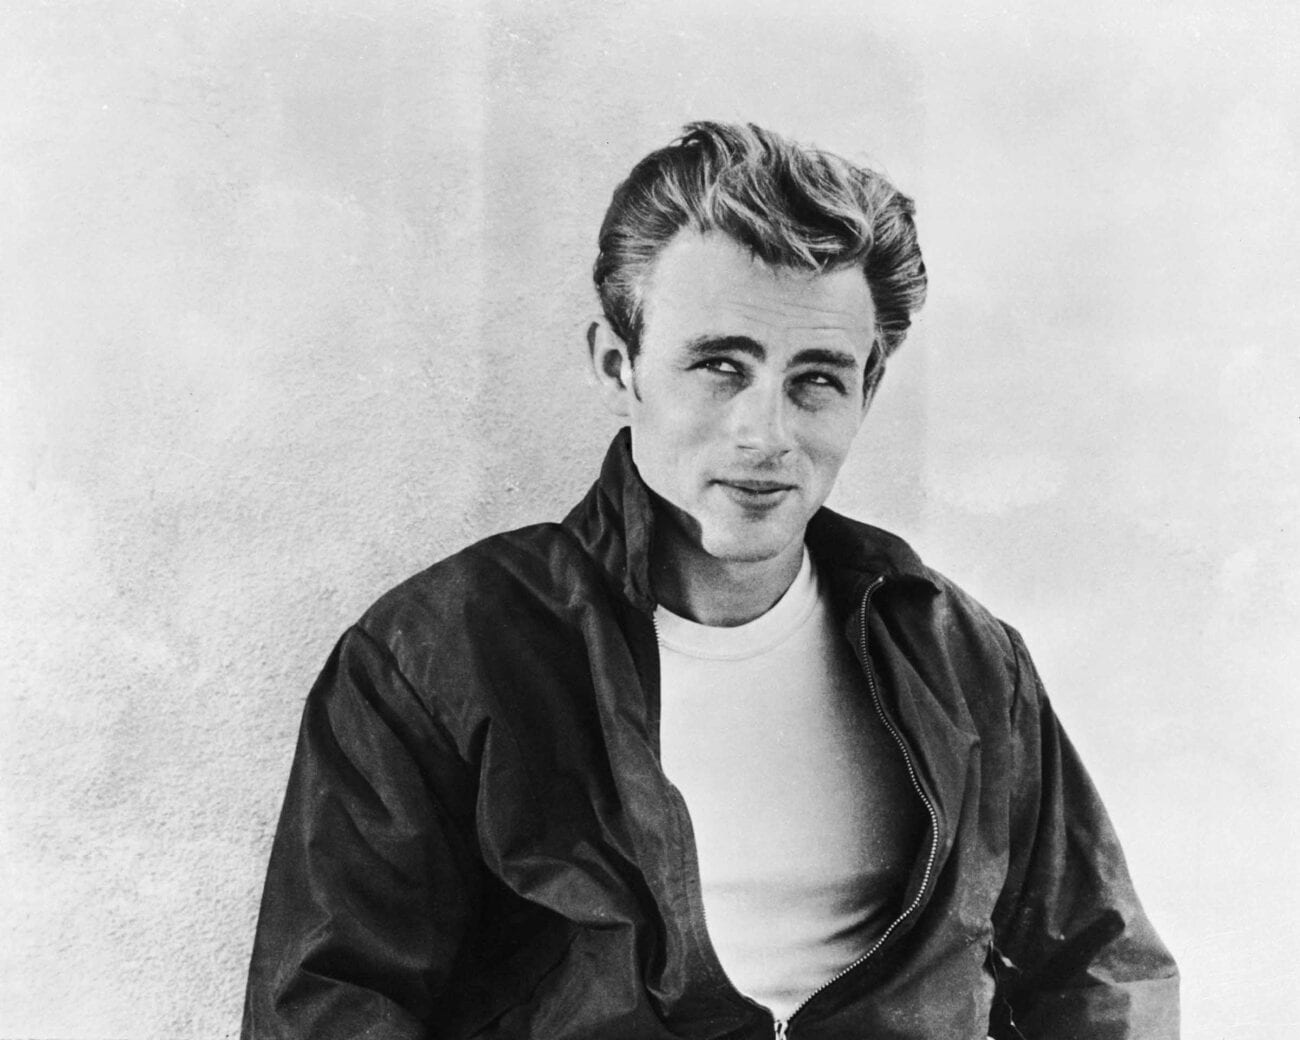 Heartthrob James Dean is, these days, known best for his signature leather jacket plus white tee combo. Here's what we know about his tragic death.